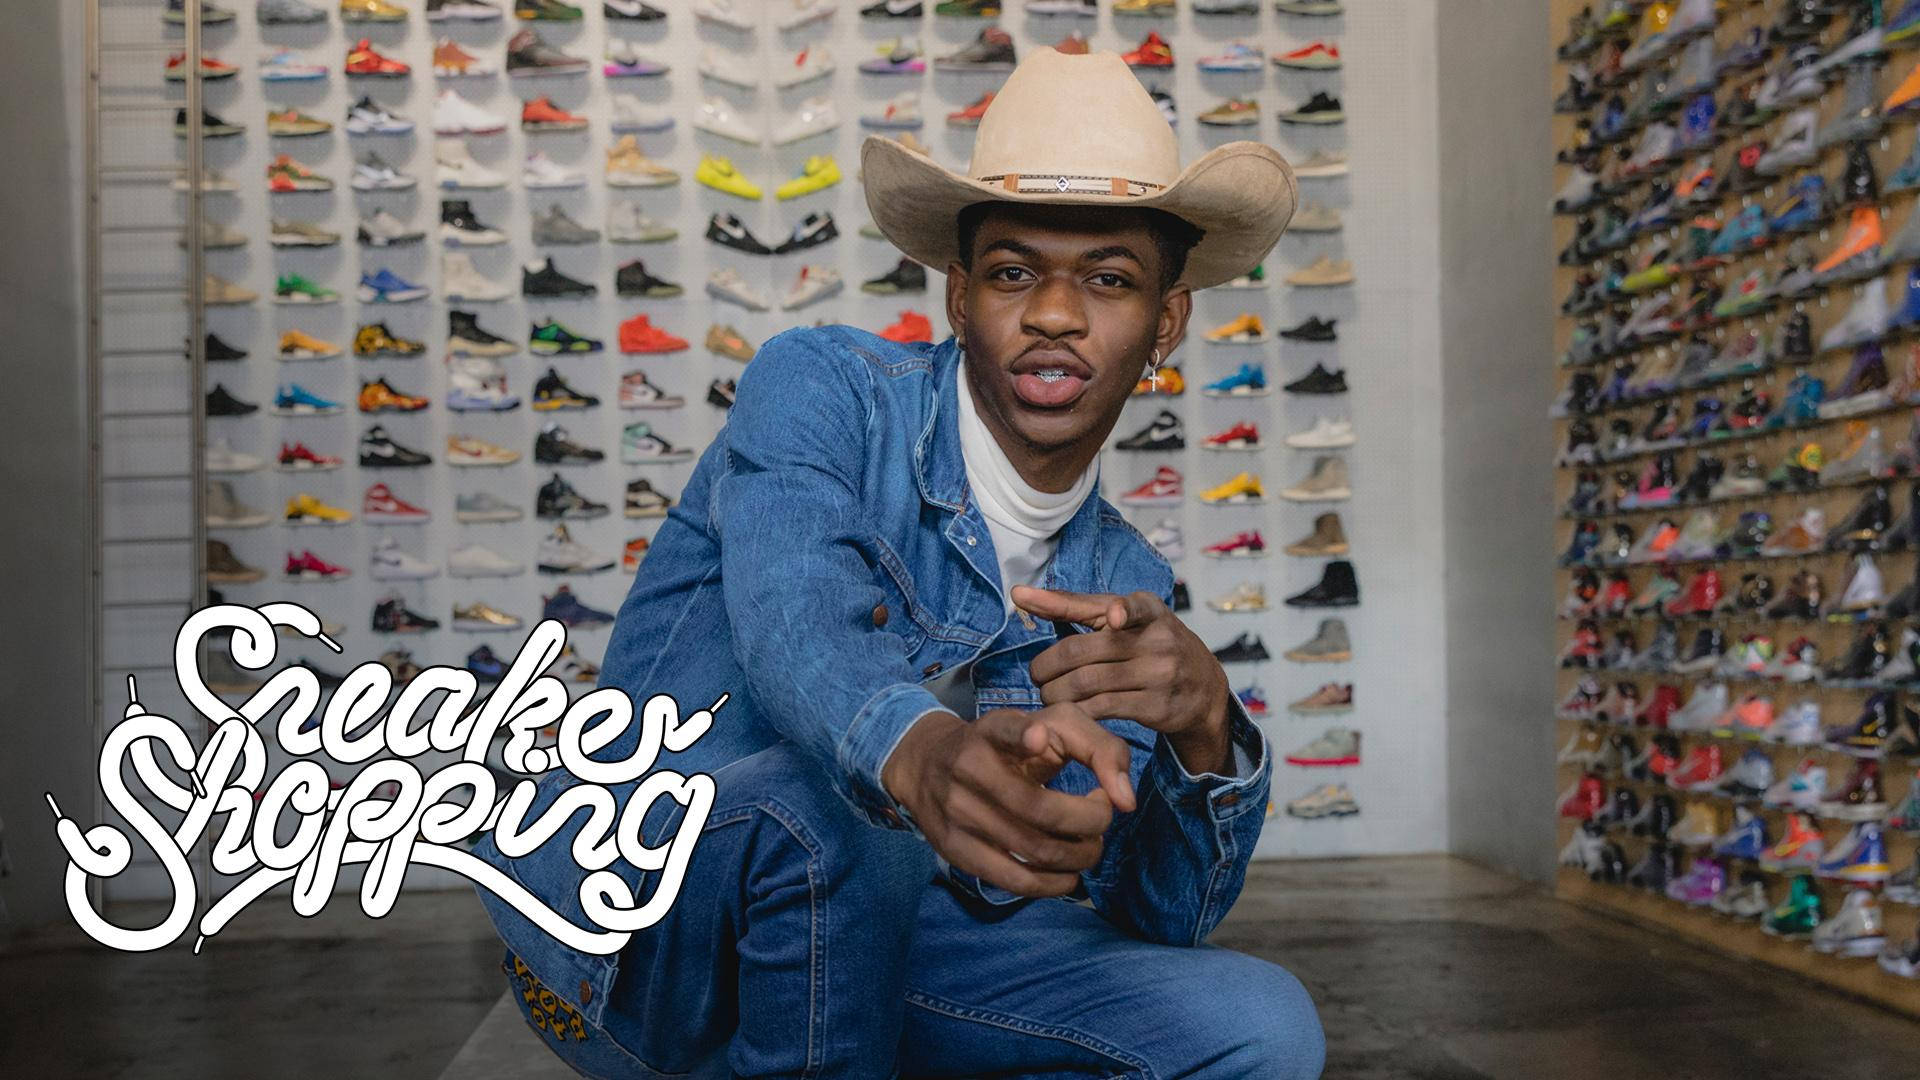 Lil Nas X Sneaker Shopping Background